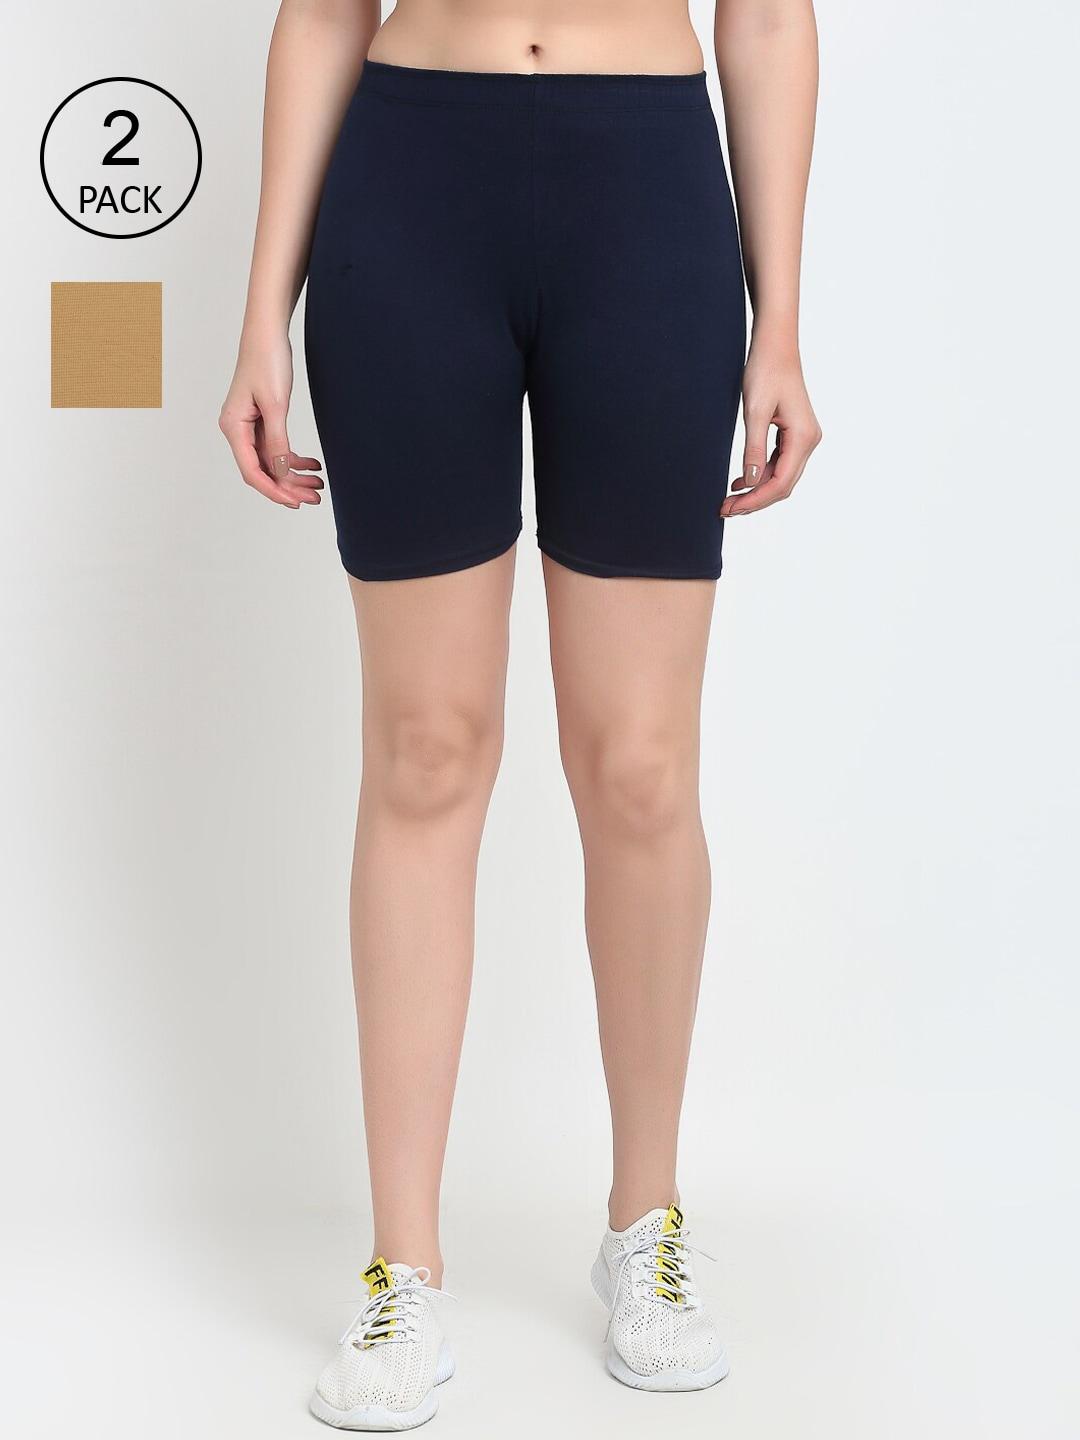 GRACIT Women Pack of 2 Navy Blue & Nude Cycling Sports Shorts